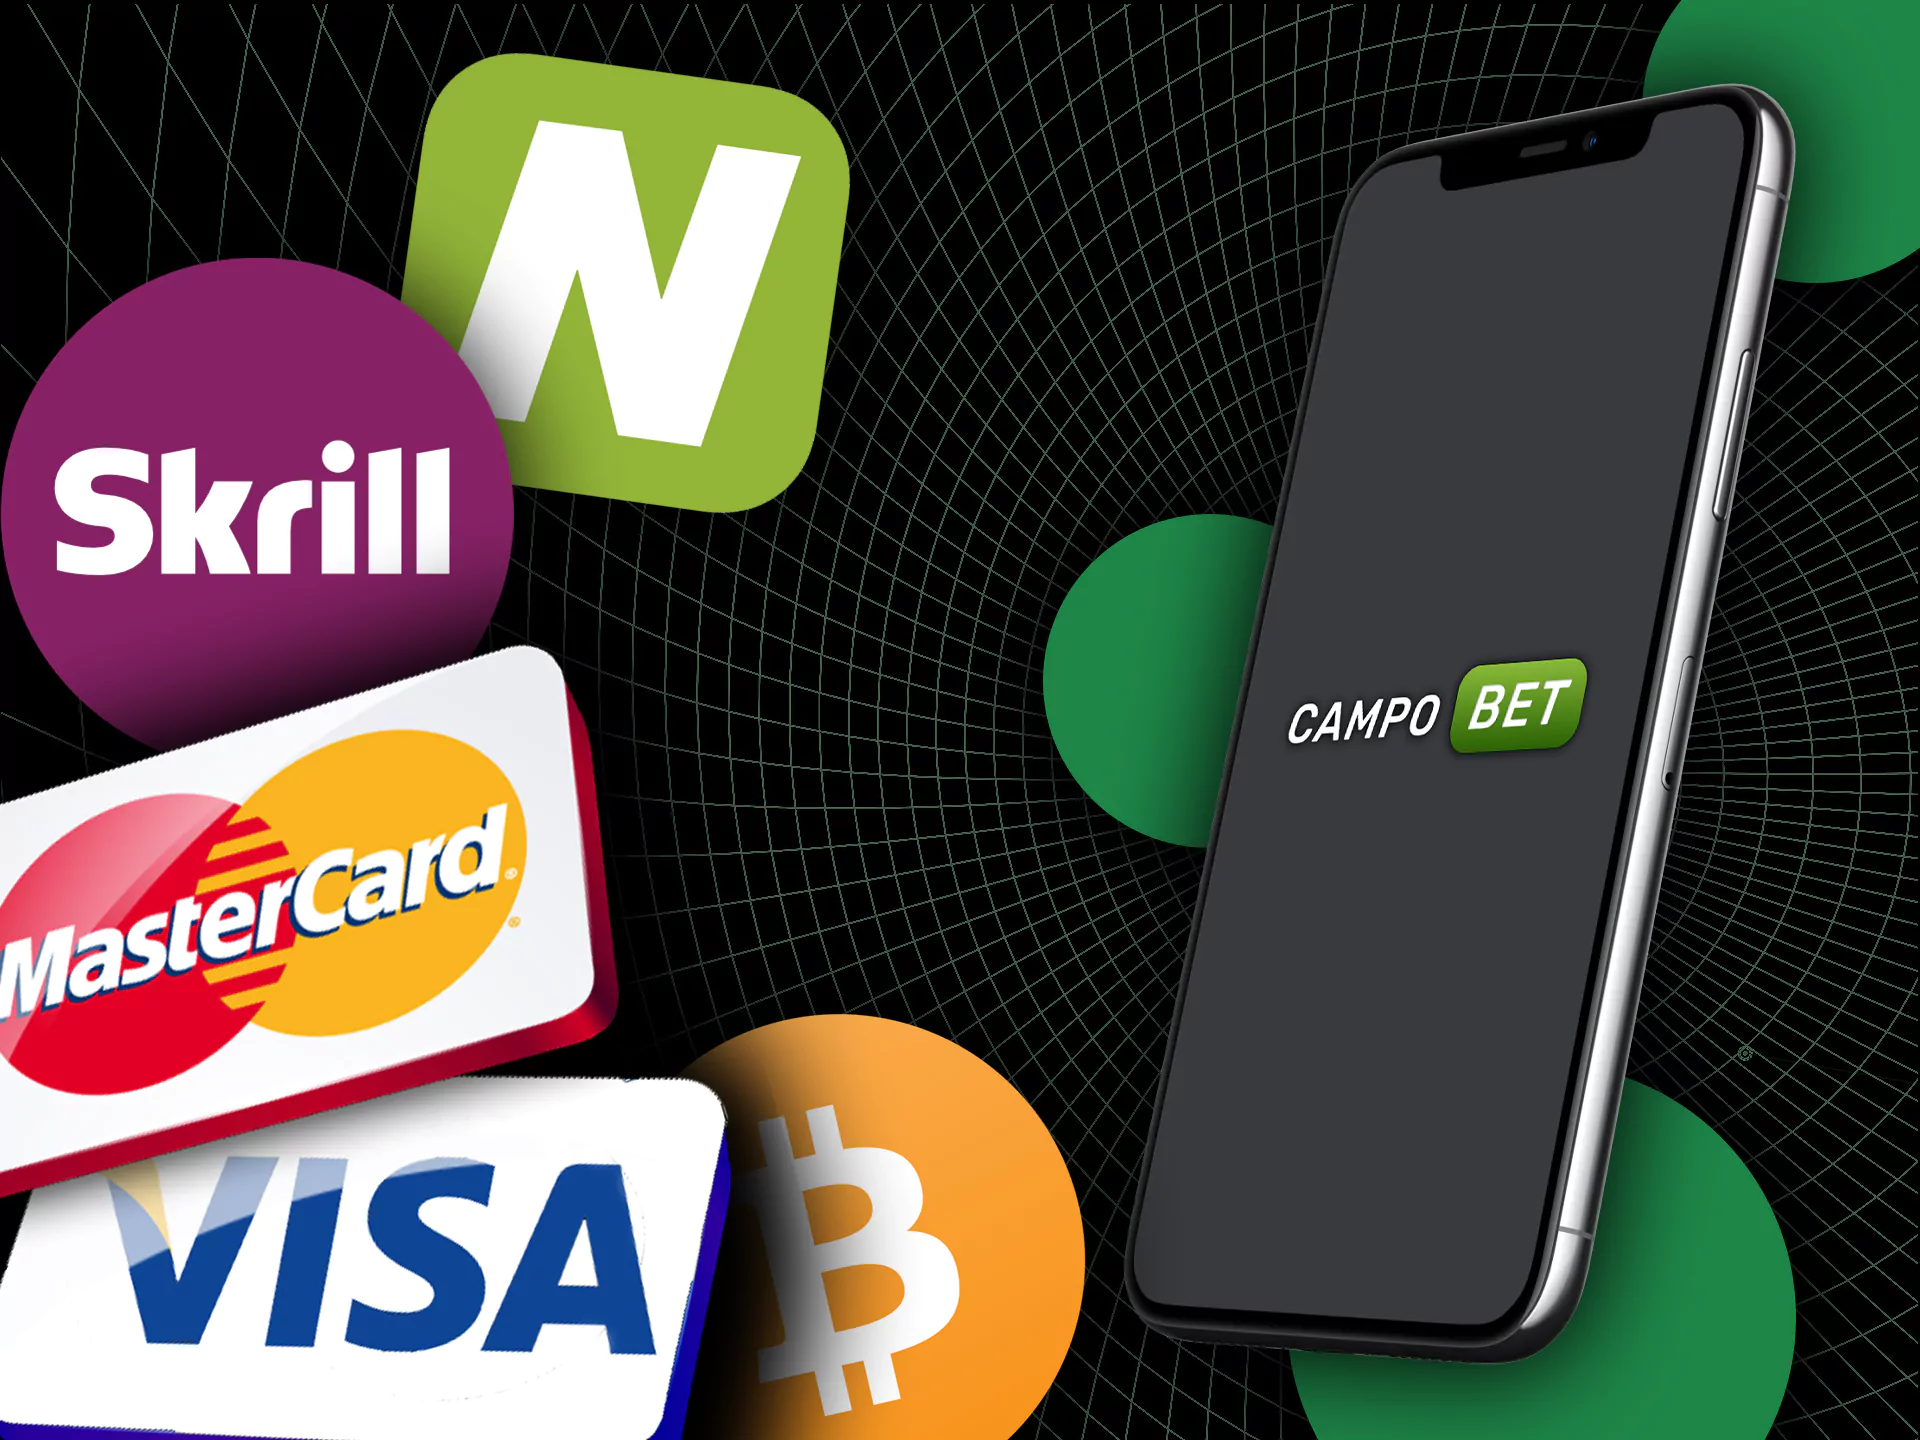 You can top up the Campobet account with help of almost any popular Indian payment system.